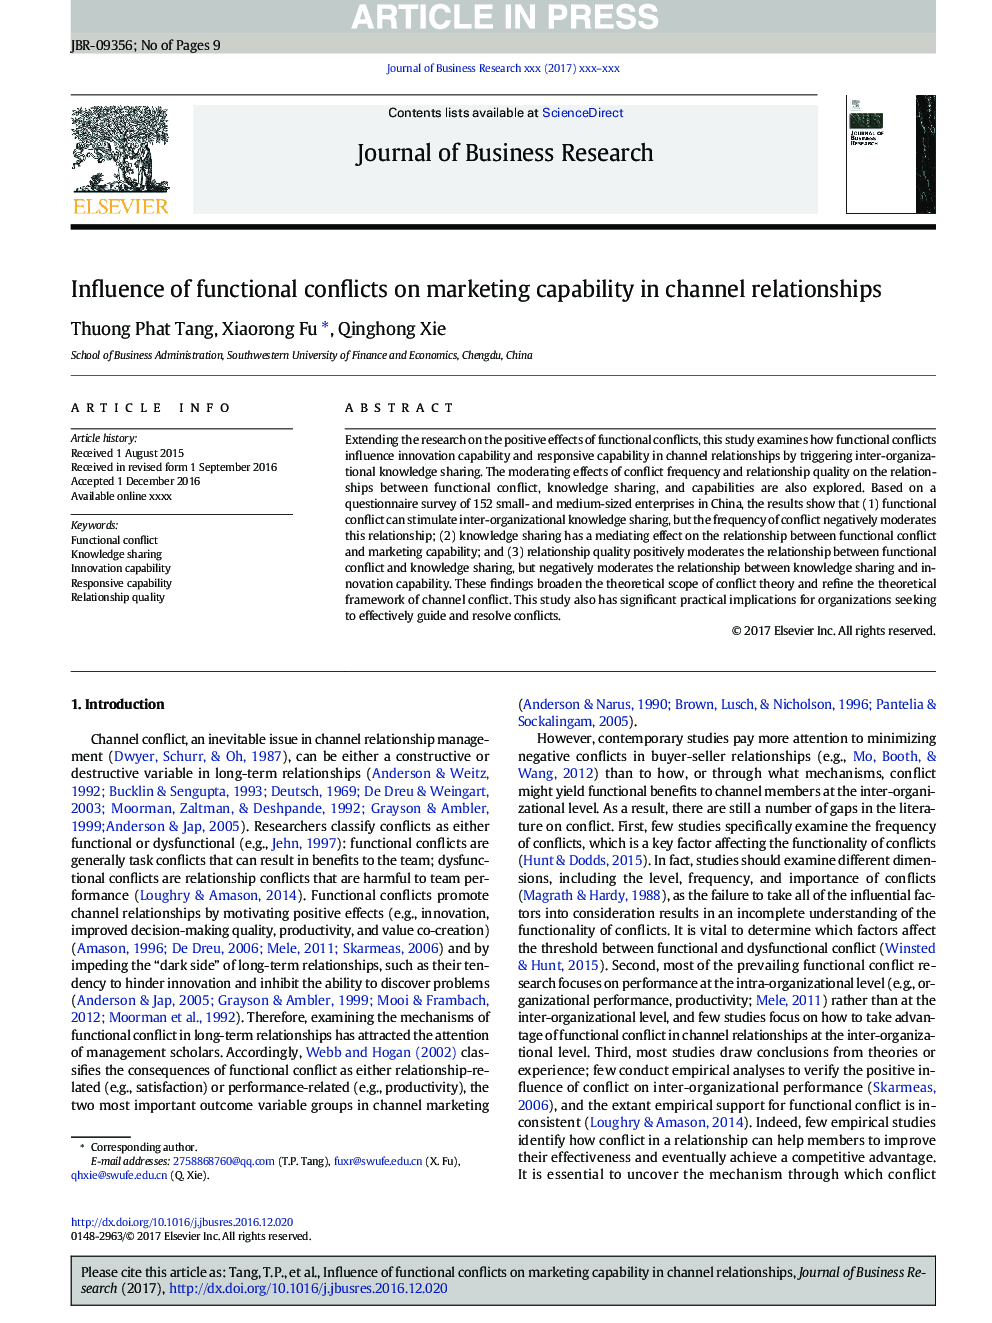 Influence of functional conflicts on marketing capability in channel relationships